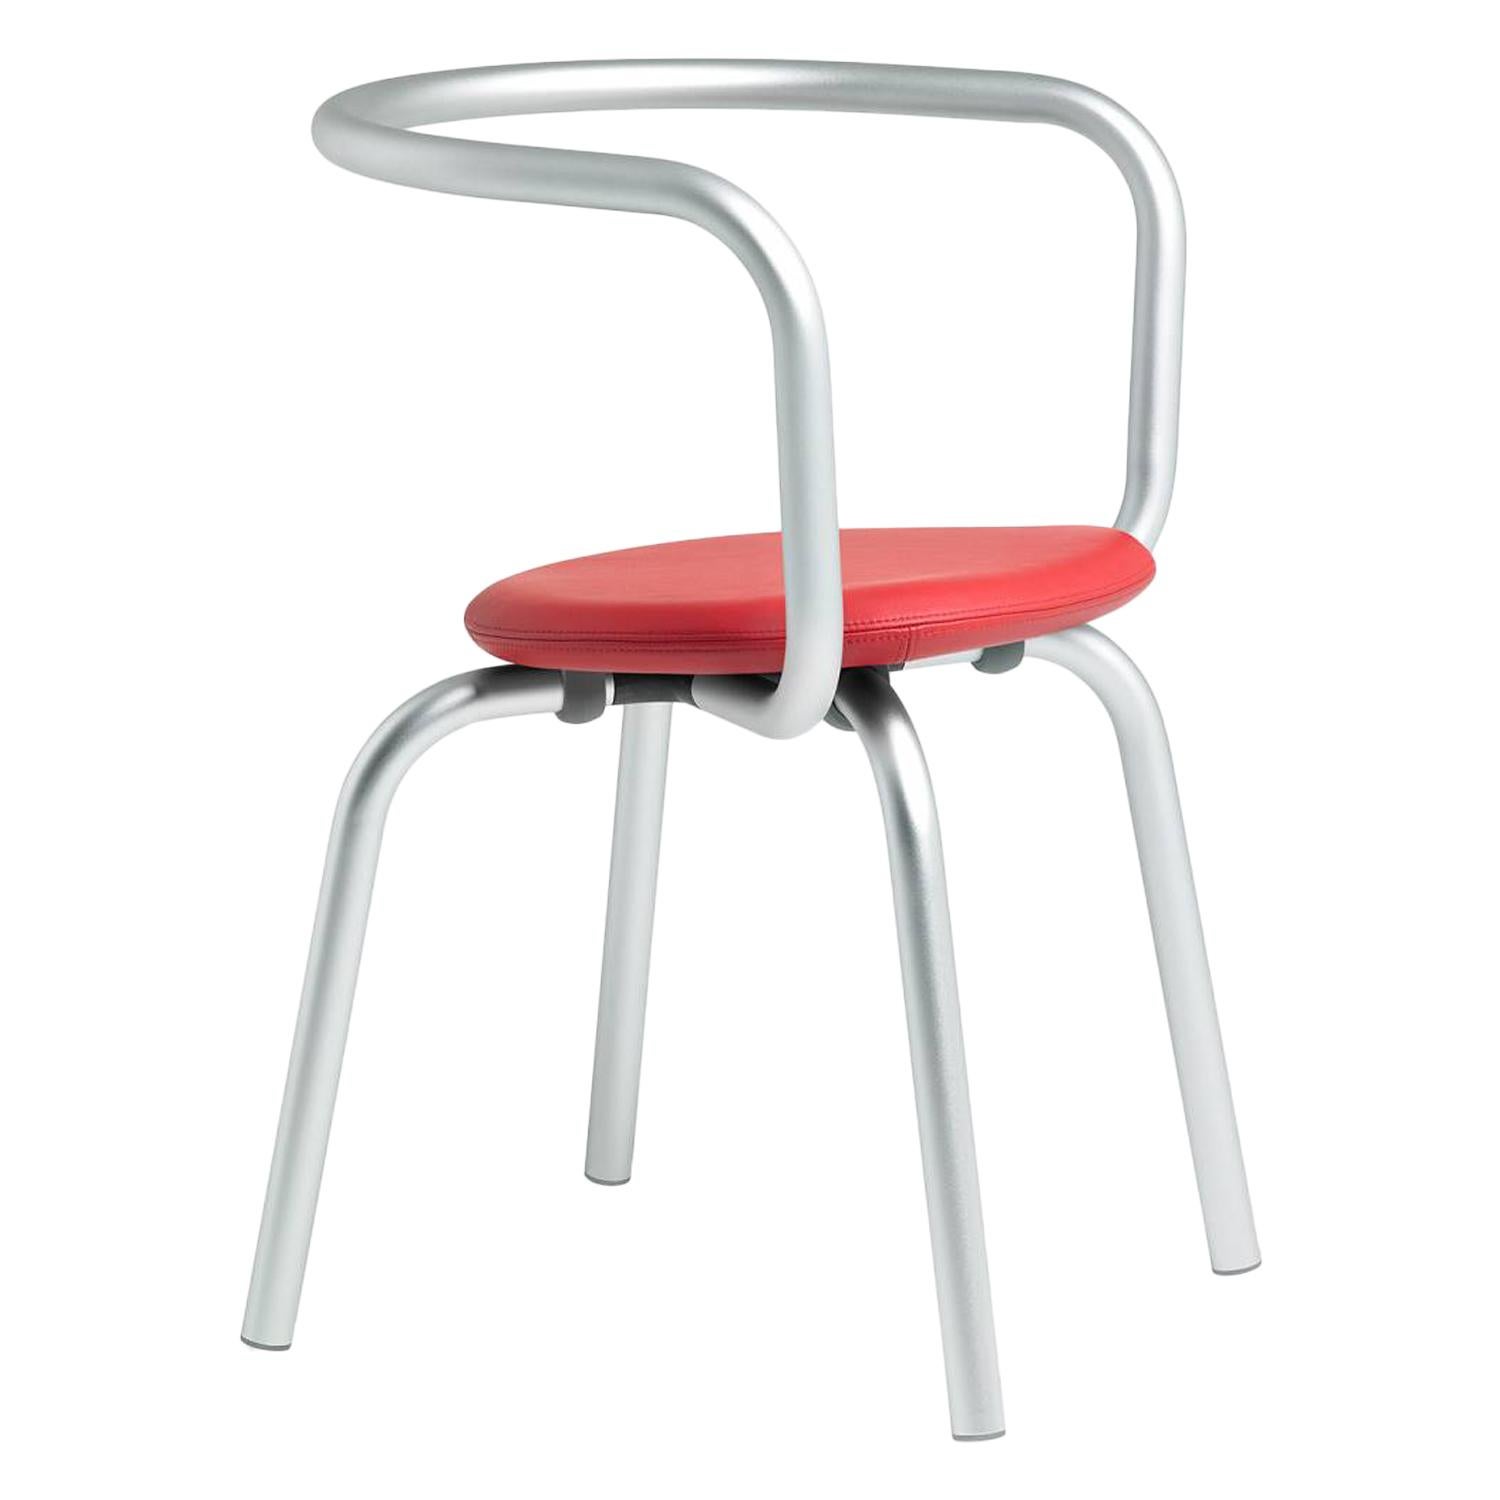 Emeco Parrish Side Chair in Aluminum & Red Leather by Konstantin Grcic